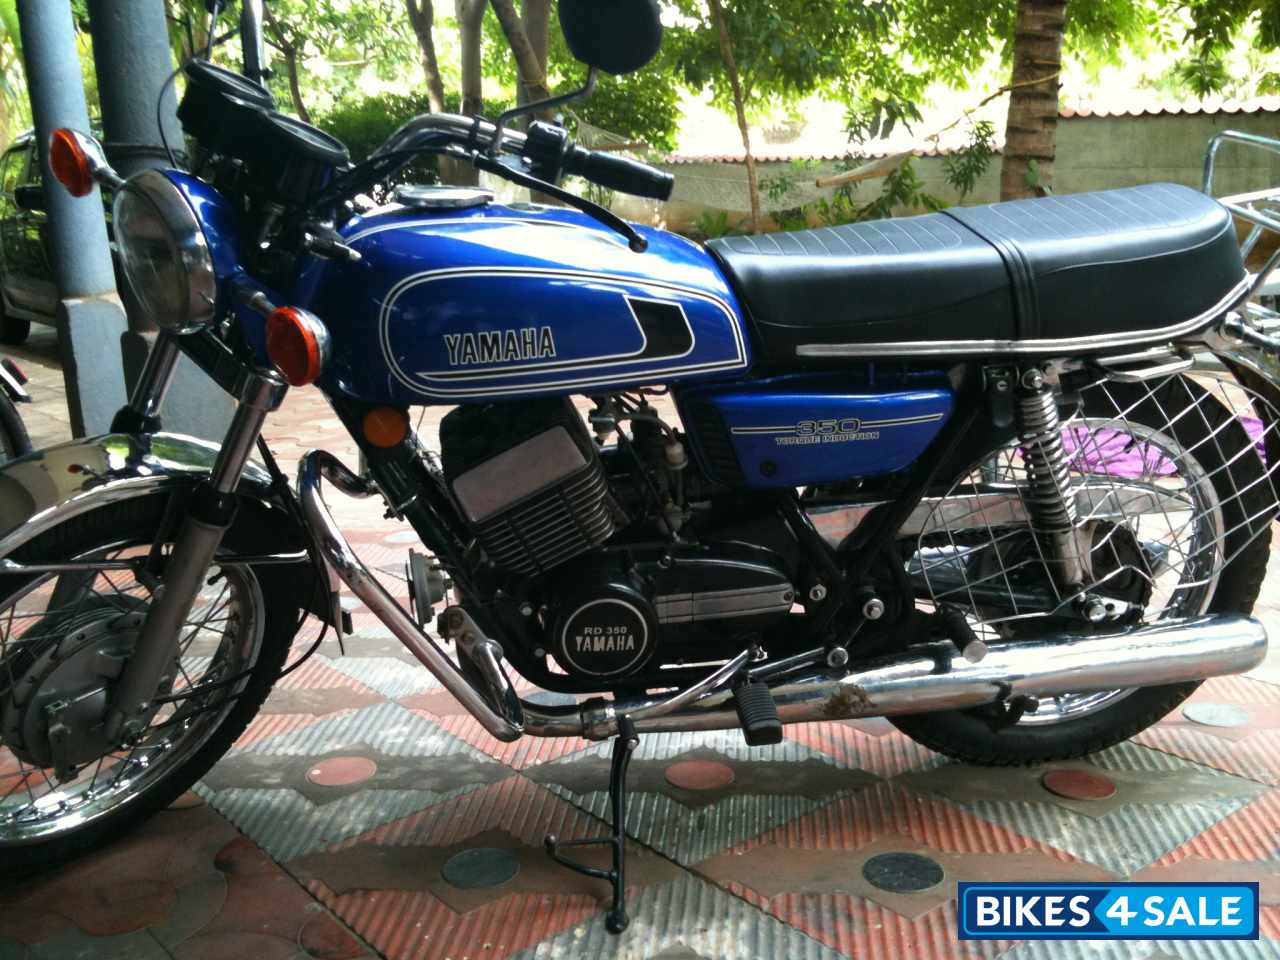 Used 1984 model Yamaha RD 350 for sale in Chennai. ID ...